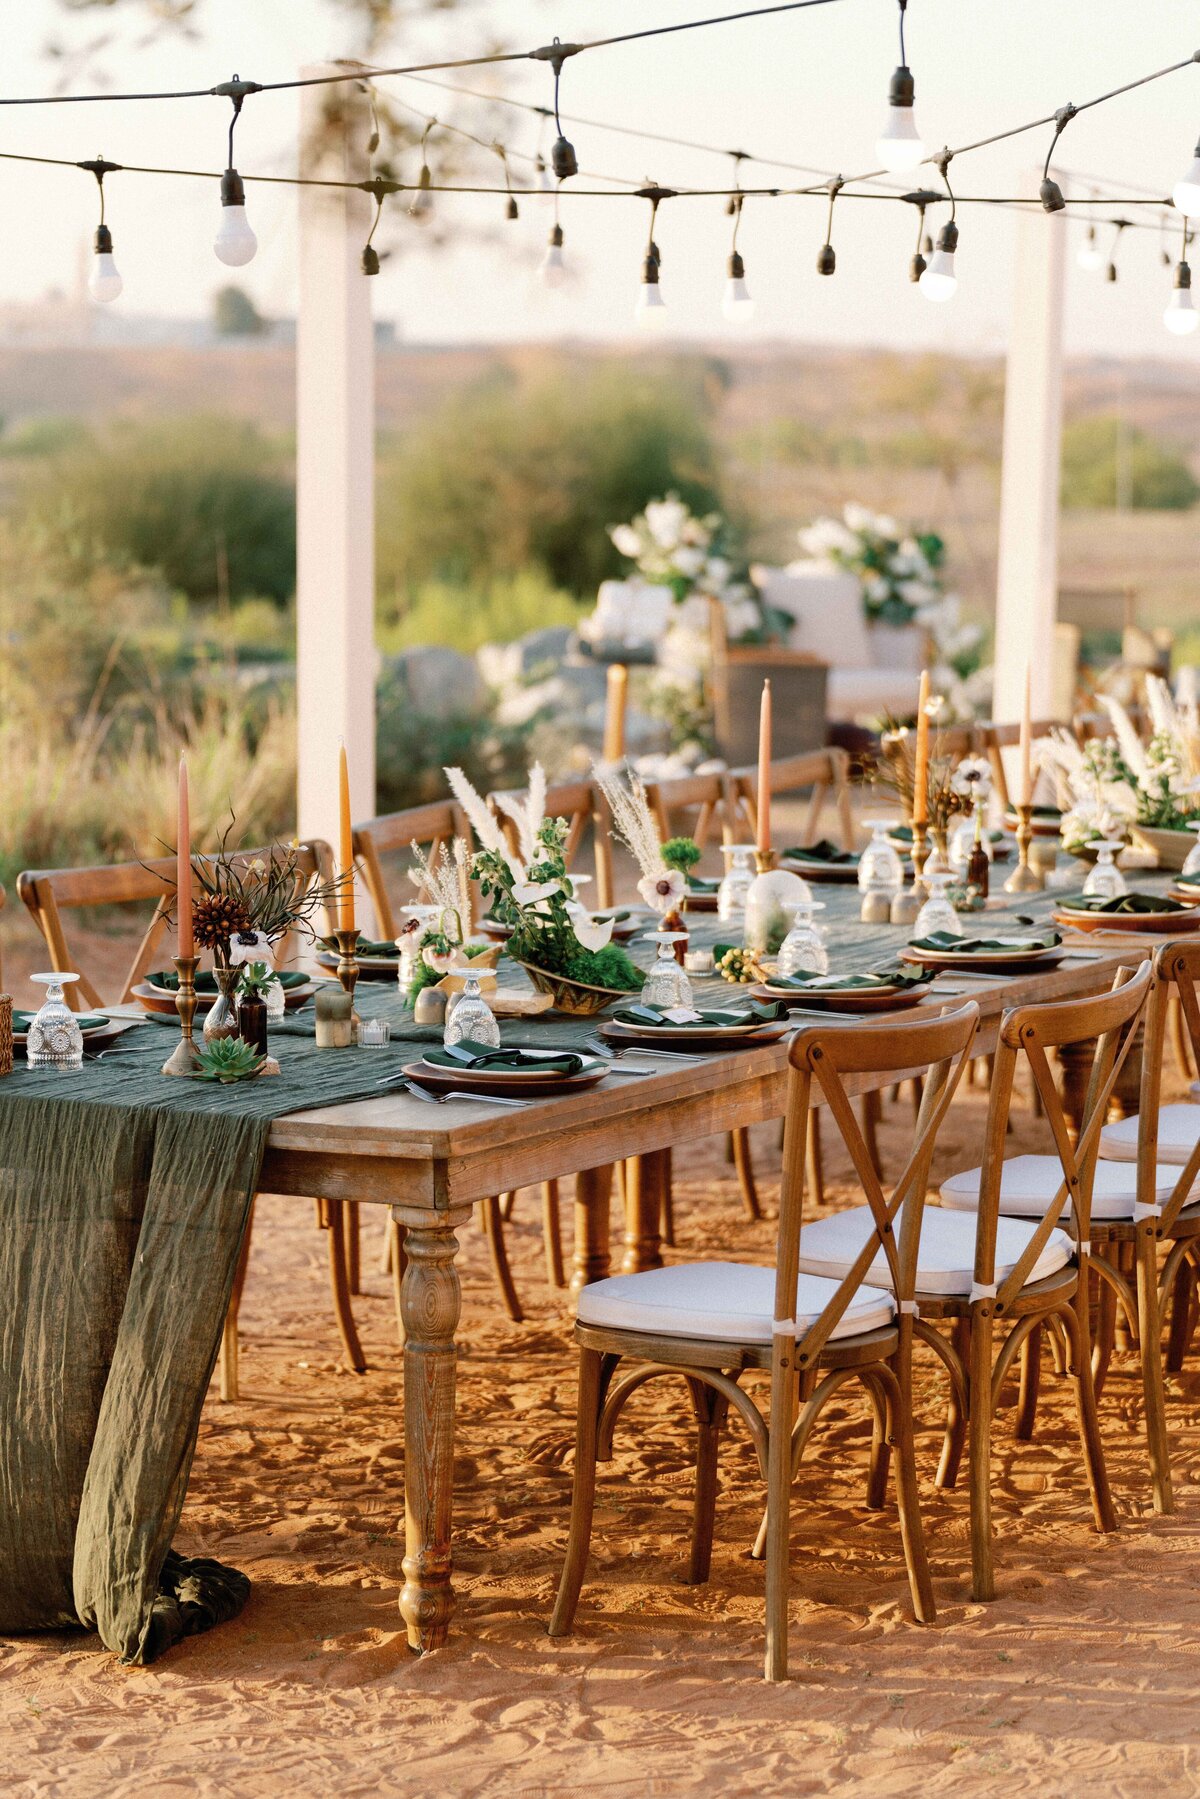 rock-your-event-wedding-styling-planner-designer-dubai-UAE-mountain-dining-experience